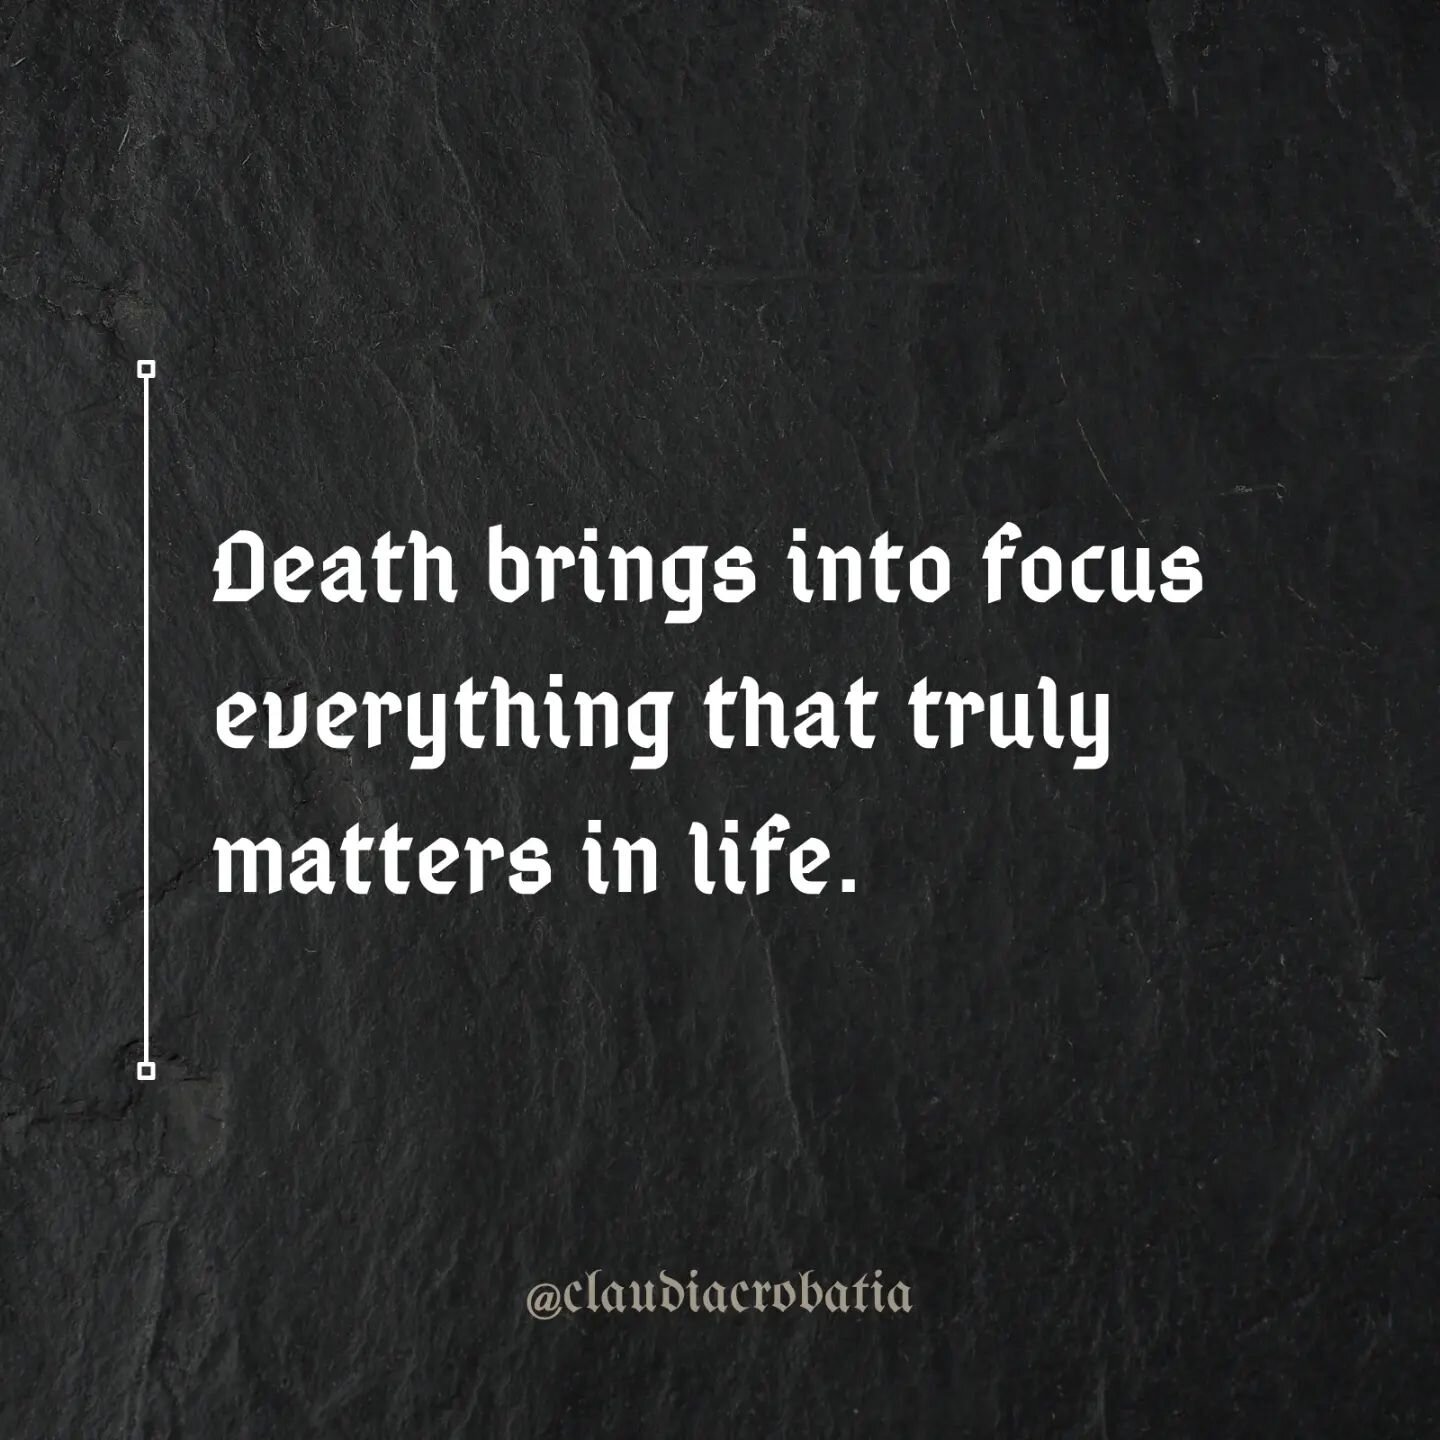 One of the benefits of contemplating mortality is that the realization that life will end can shift your focus to the things that really matter to you. 

What makes you happy, what brings you joy, what gives you fulfillment? All the small things, and